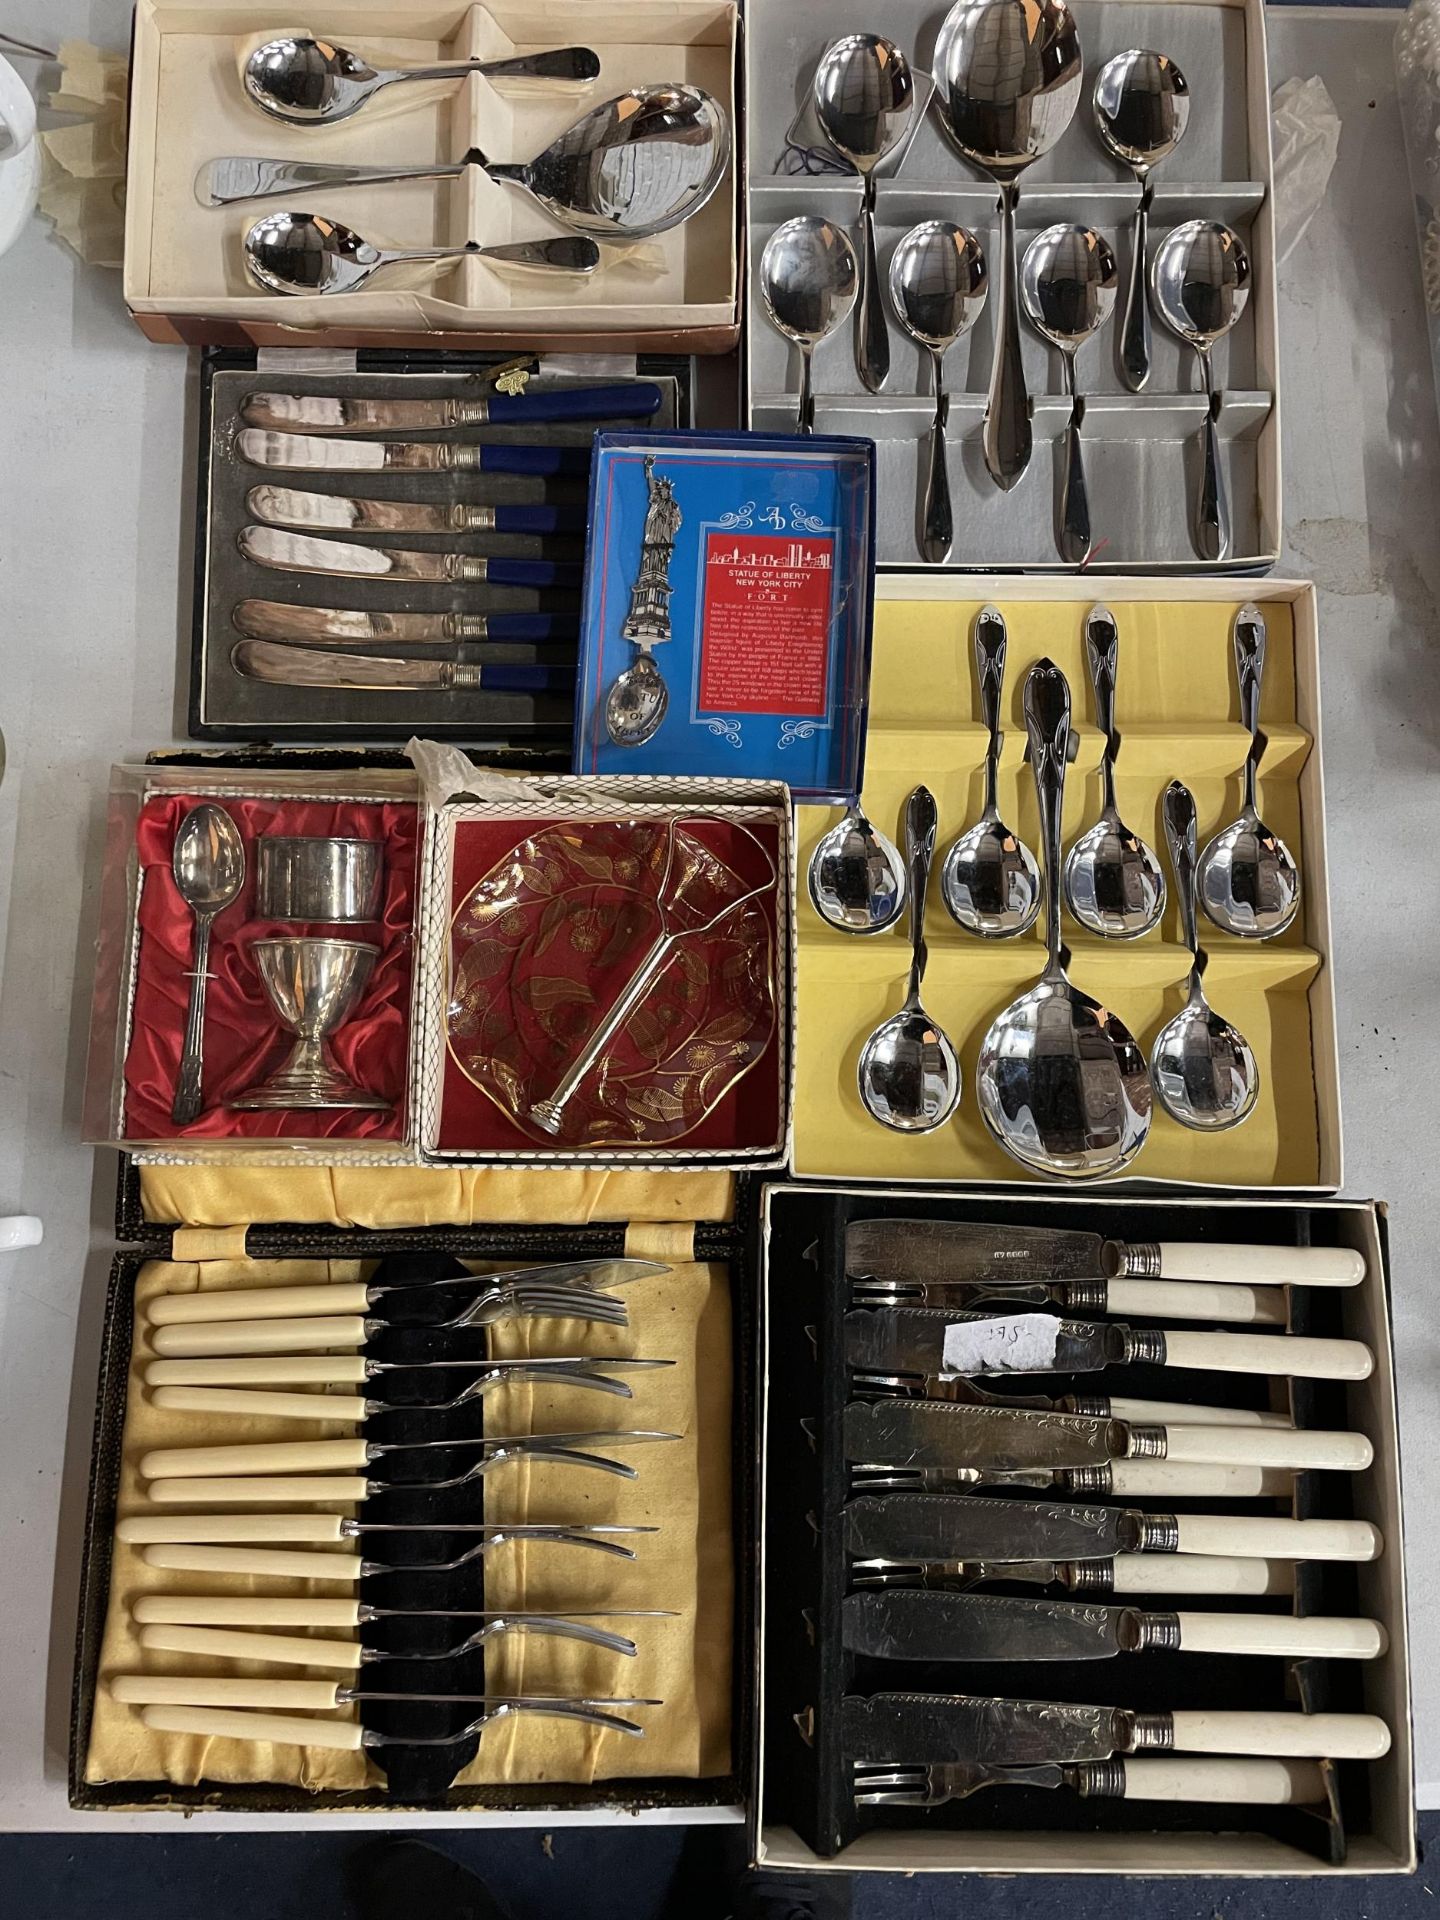 SIX BOXES OF FLATWARE TO INCLUDE KNIVES, FORKS, SPOONS ETC, PLUS A BOXED EGGCUP, NAPKIN RING SET